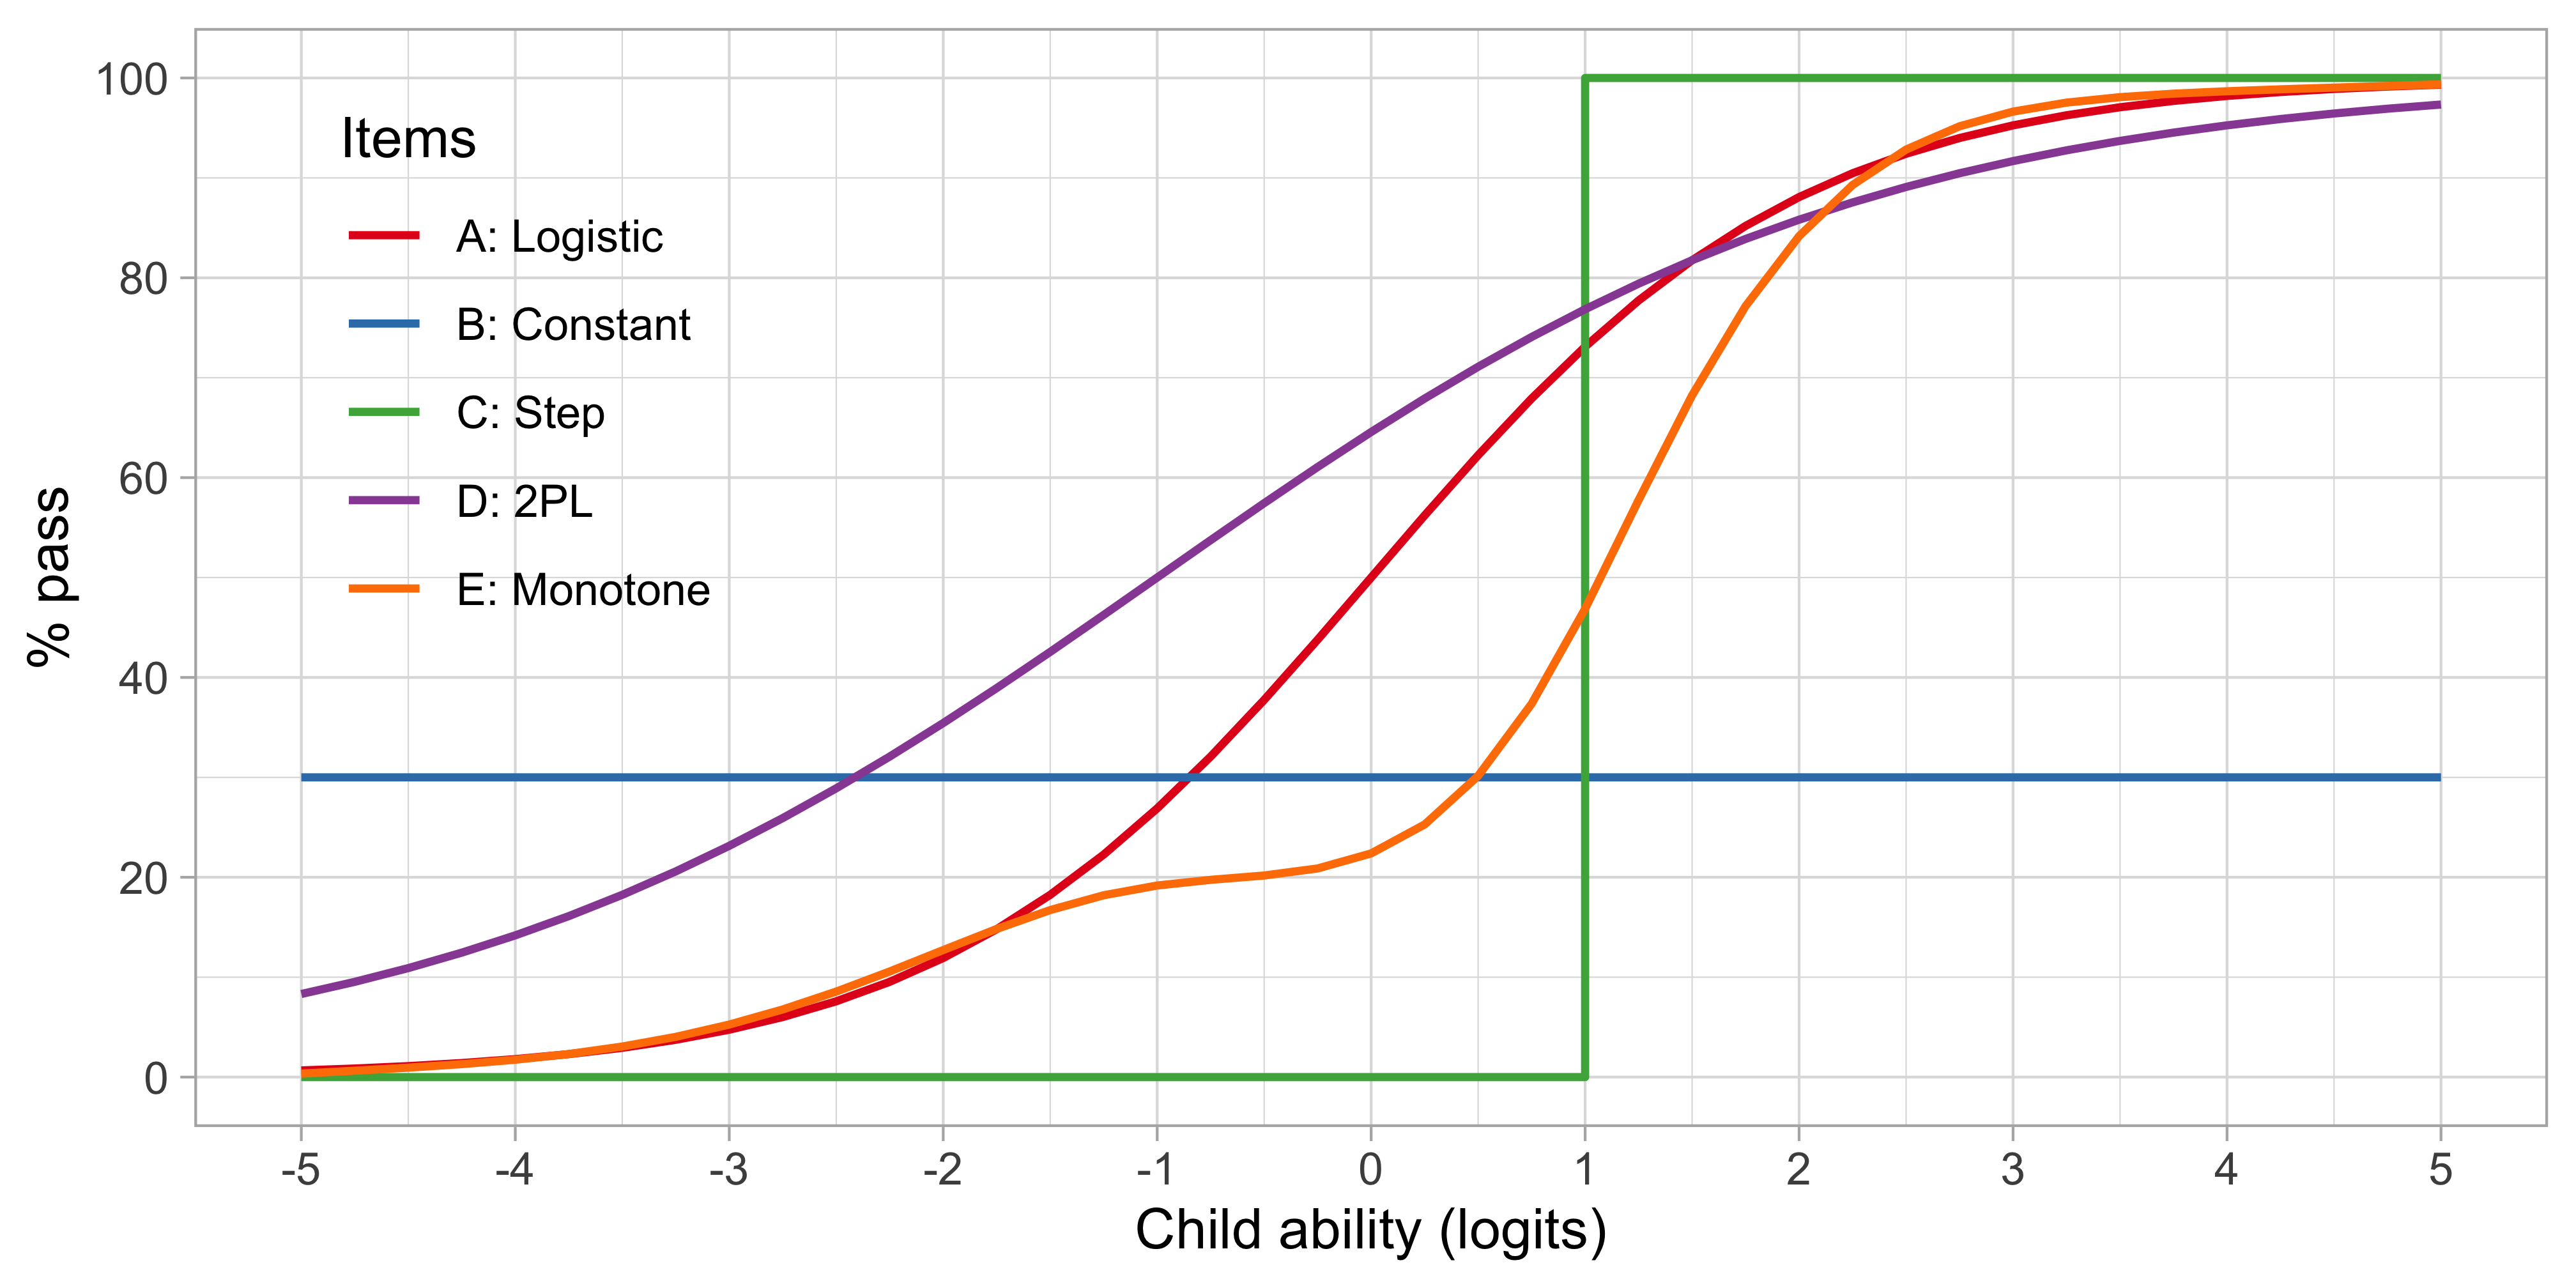 Item response functions for five hypothetical items, each demonstrating a positive relation between ability and probability to pass.